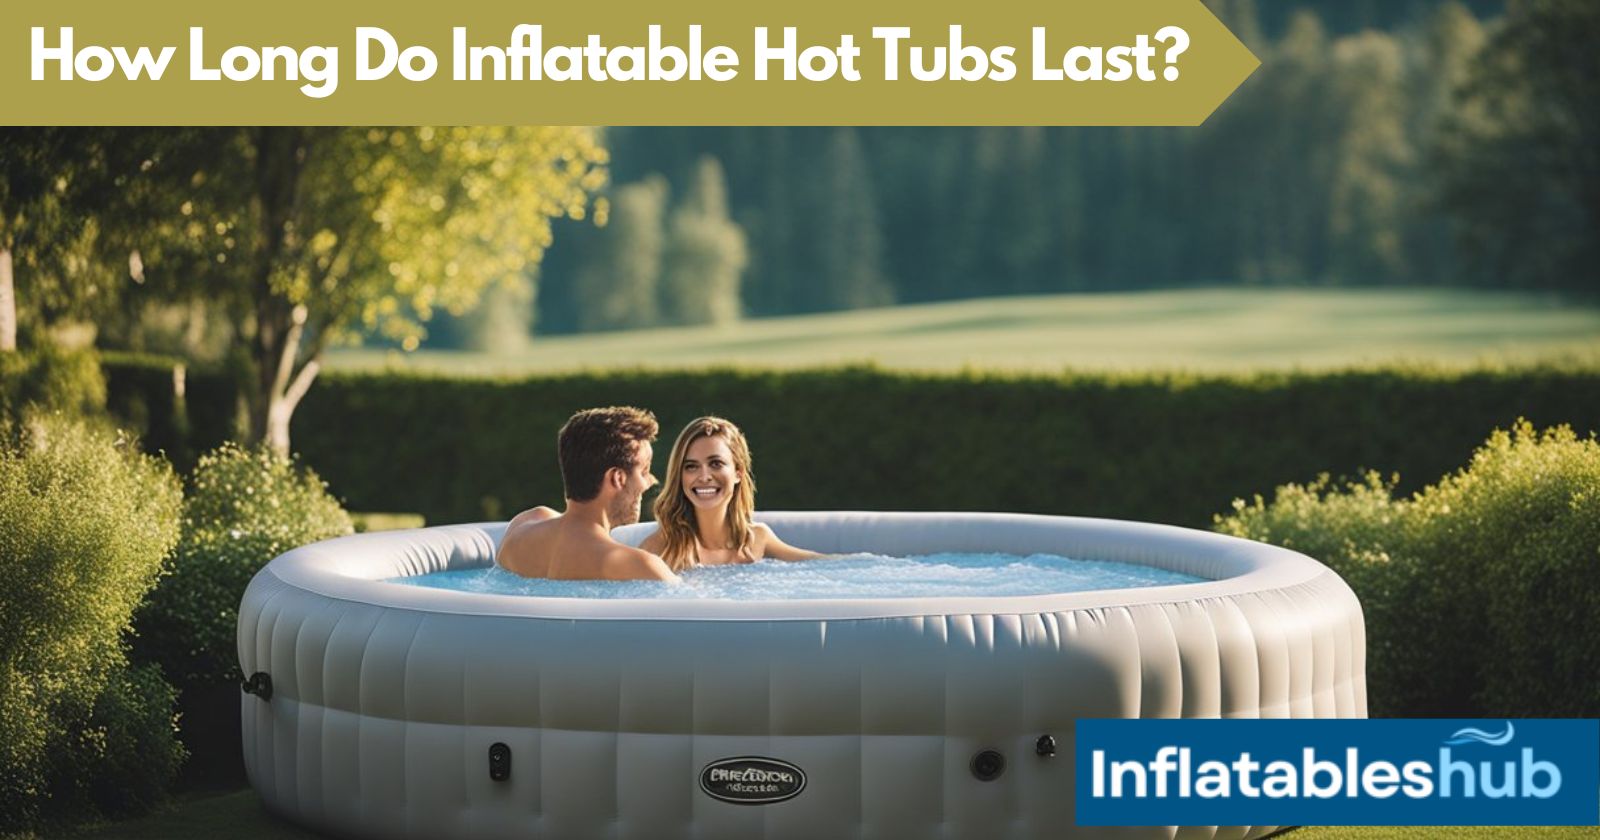 How Long Do Inflatable Hot Tubs Last